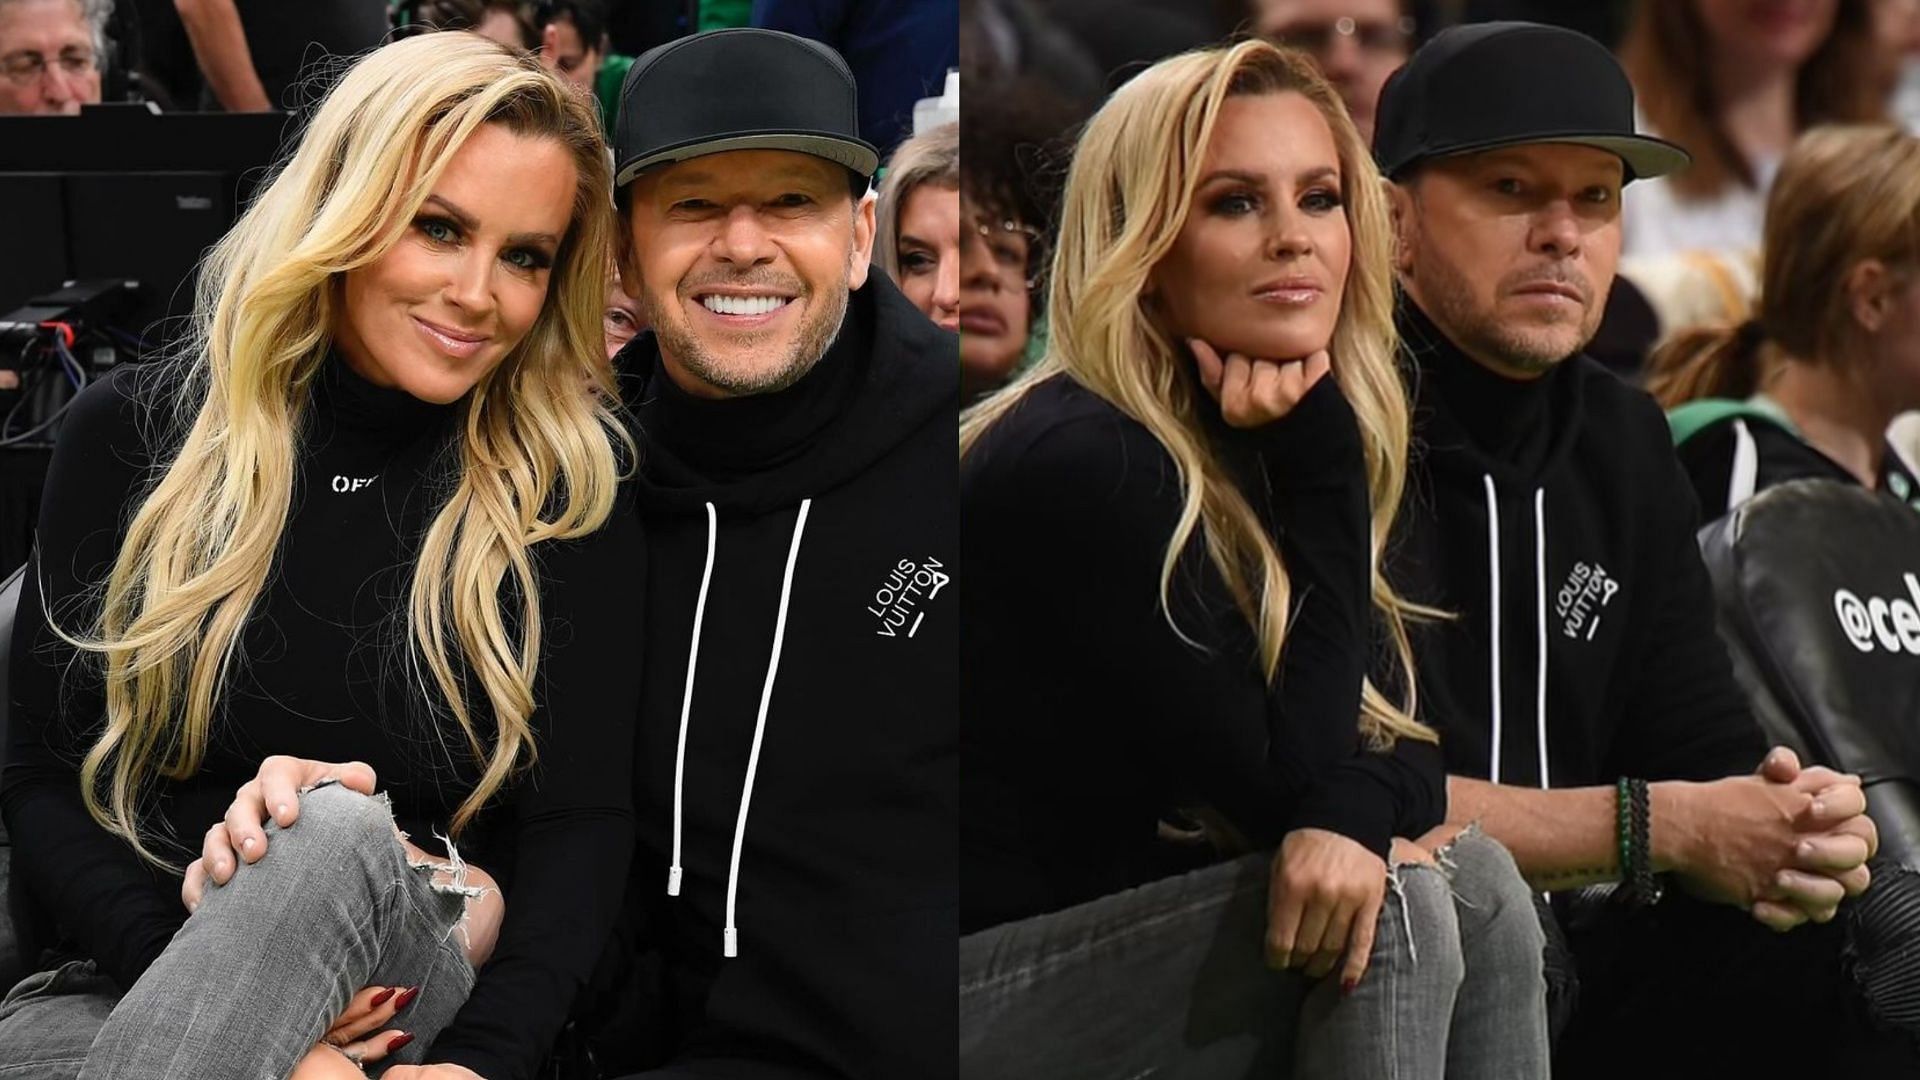 Jenny McCarthy says she took a break from dating before meeting husband Donnie Wahlberg. (Image via Instagram/@jennymccarthy)